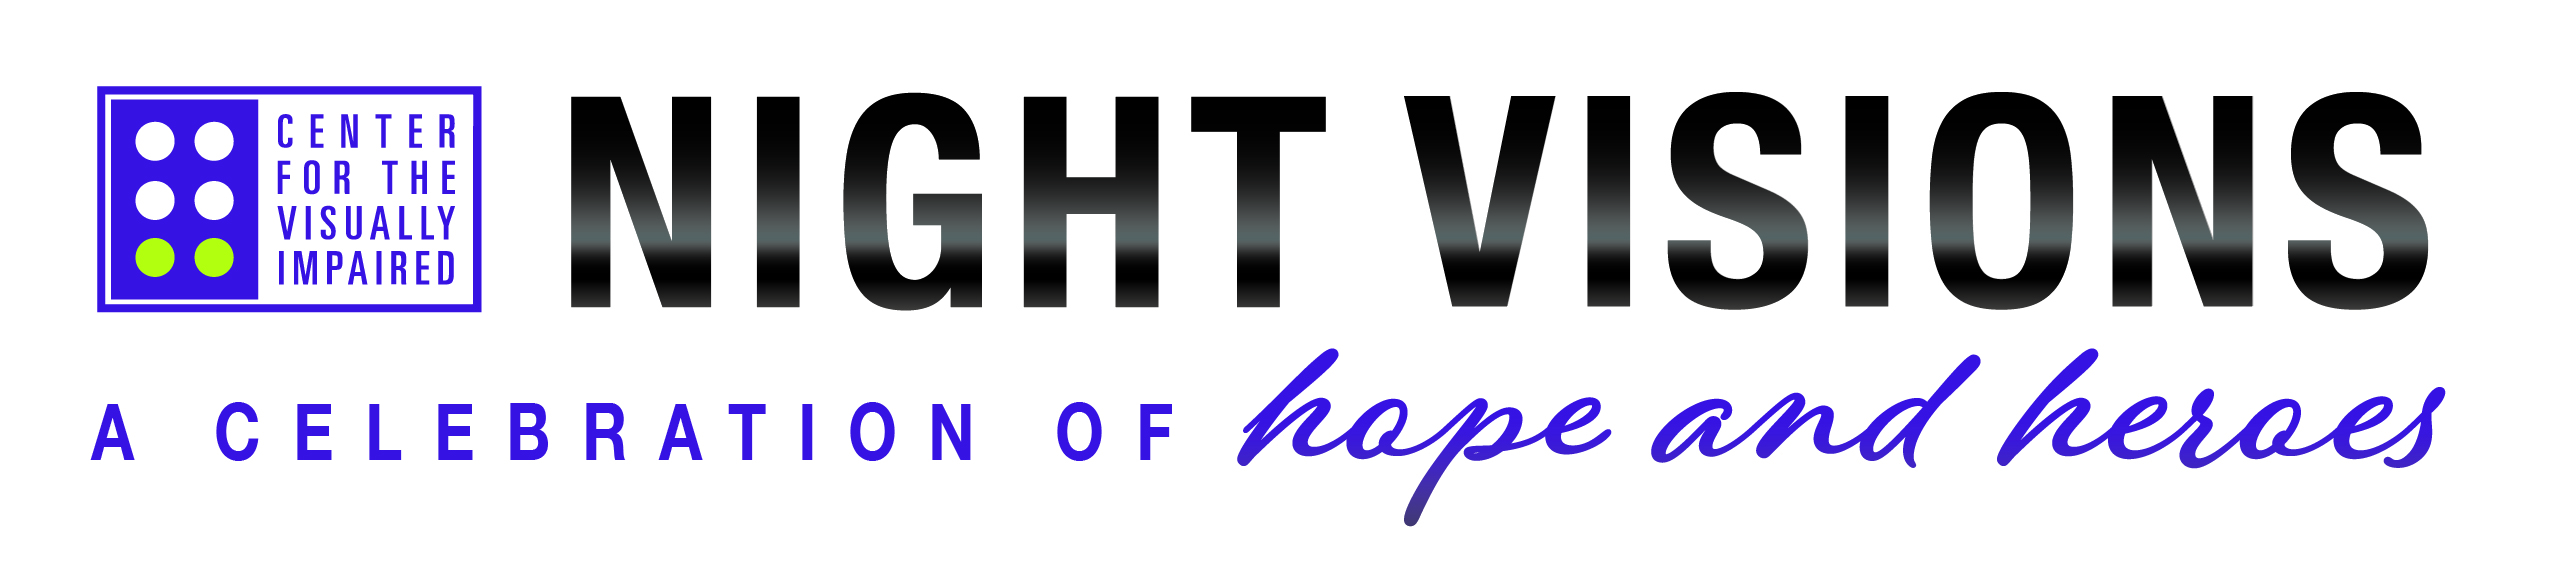 Night Visions: A Celebration of Hope and Heroes